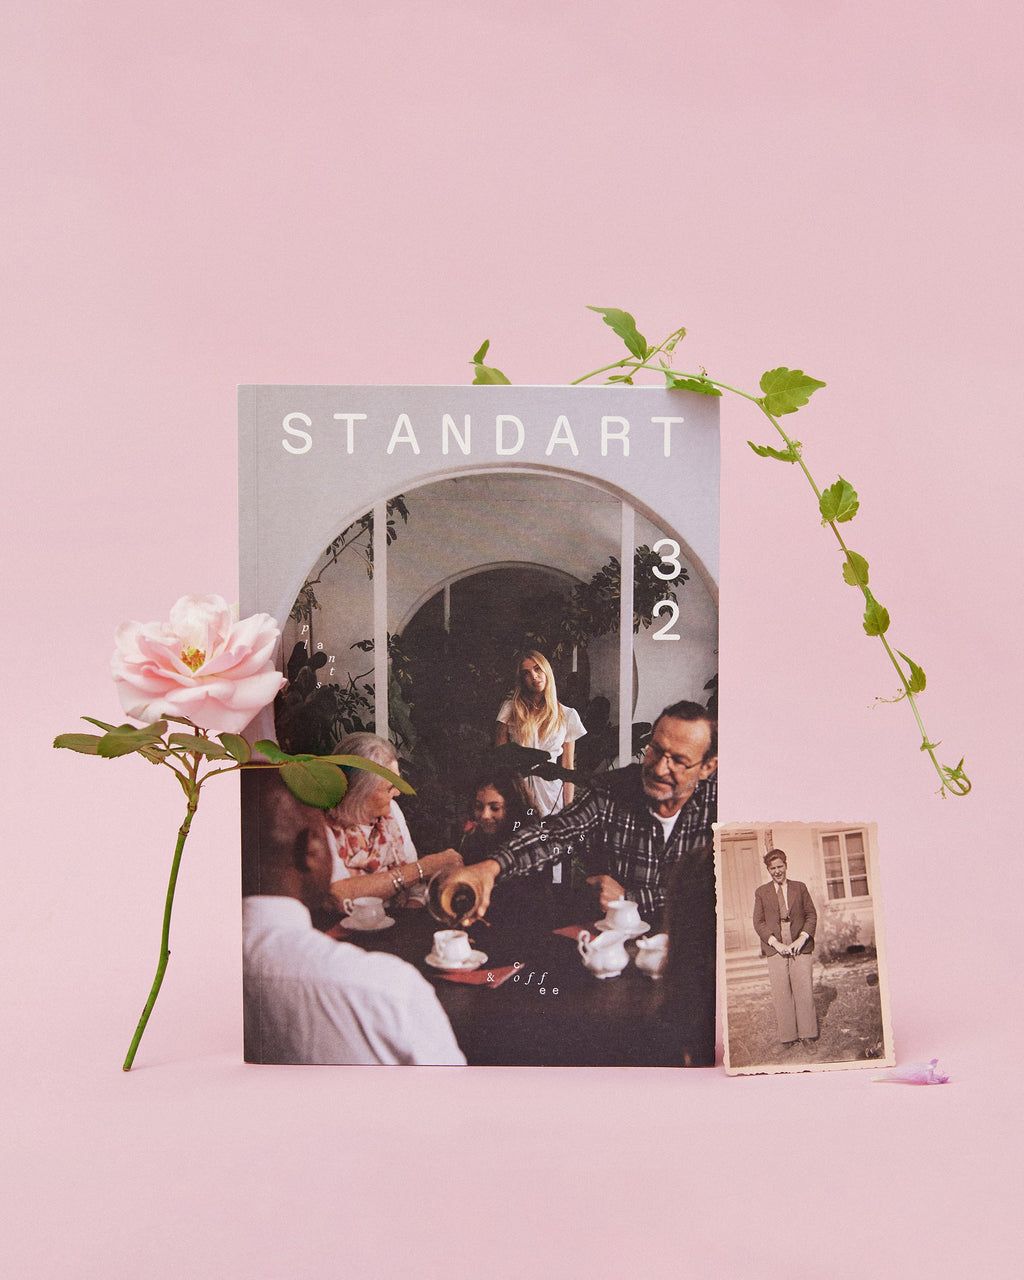 Standart Magazine Subscription: Voted Best Coffee Magazine by sprudge.com readers